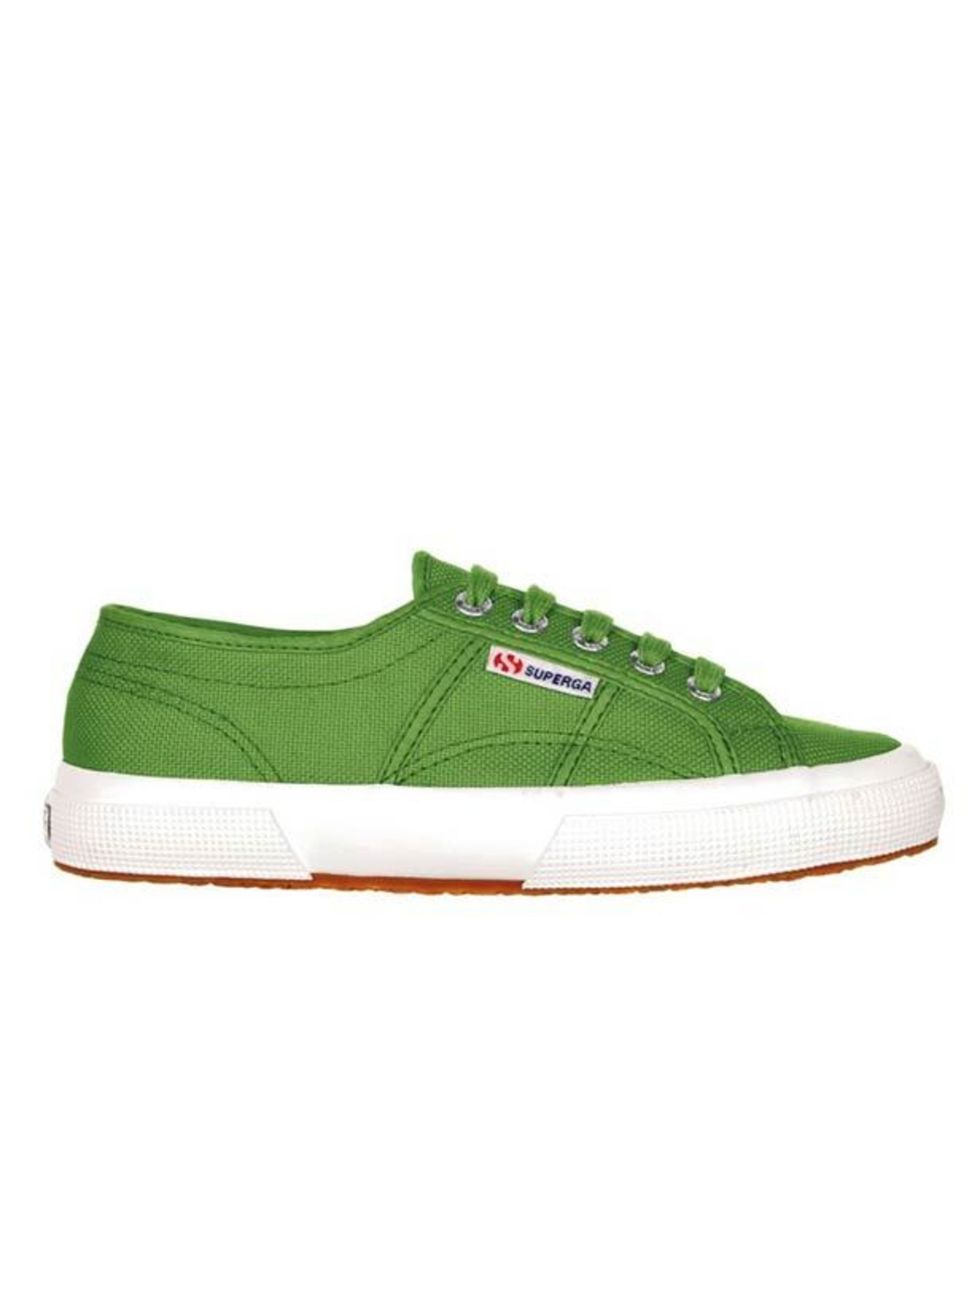 <p>Sienna and Alexa have already given Superga their seal of approval so alternate this green pair with your deck shoes for a colourful take on spring footwear... <a href="http://www.superga.co.uk/">Superga</a> pumps, £40</p>